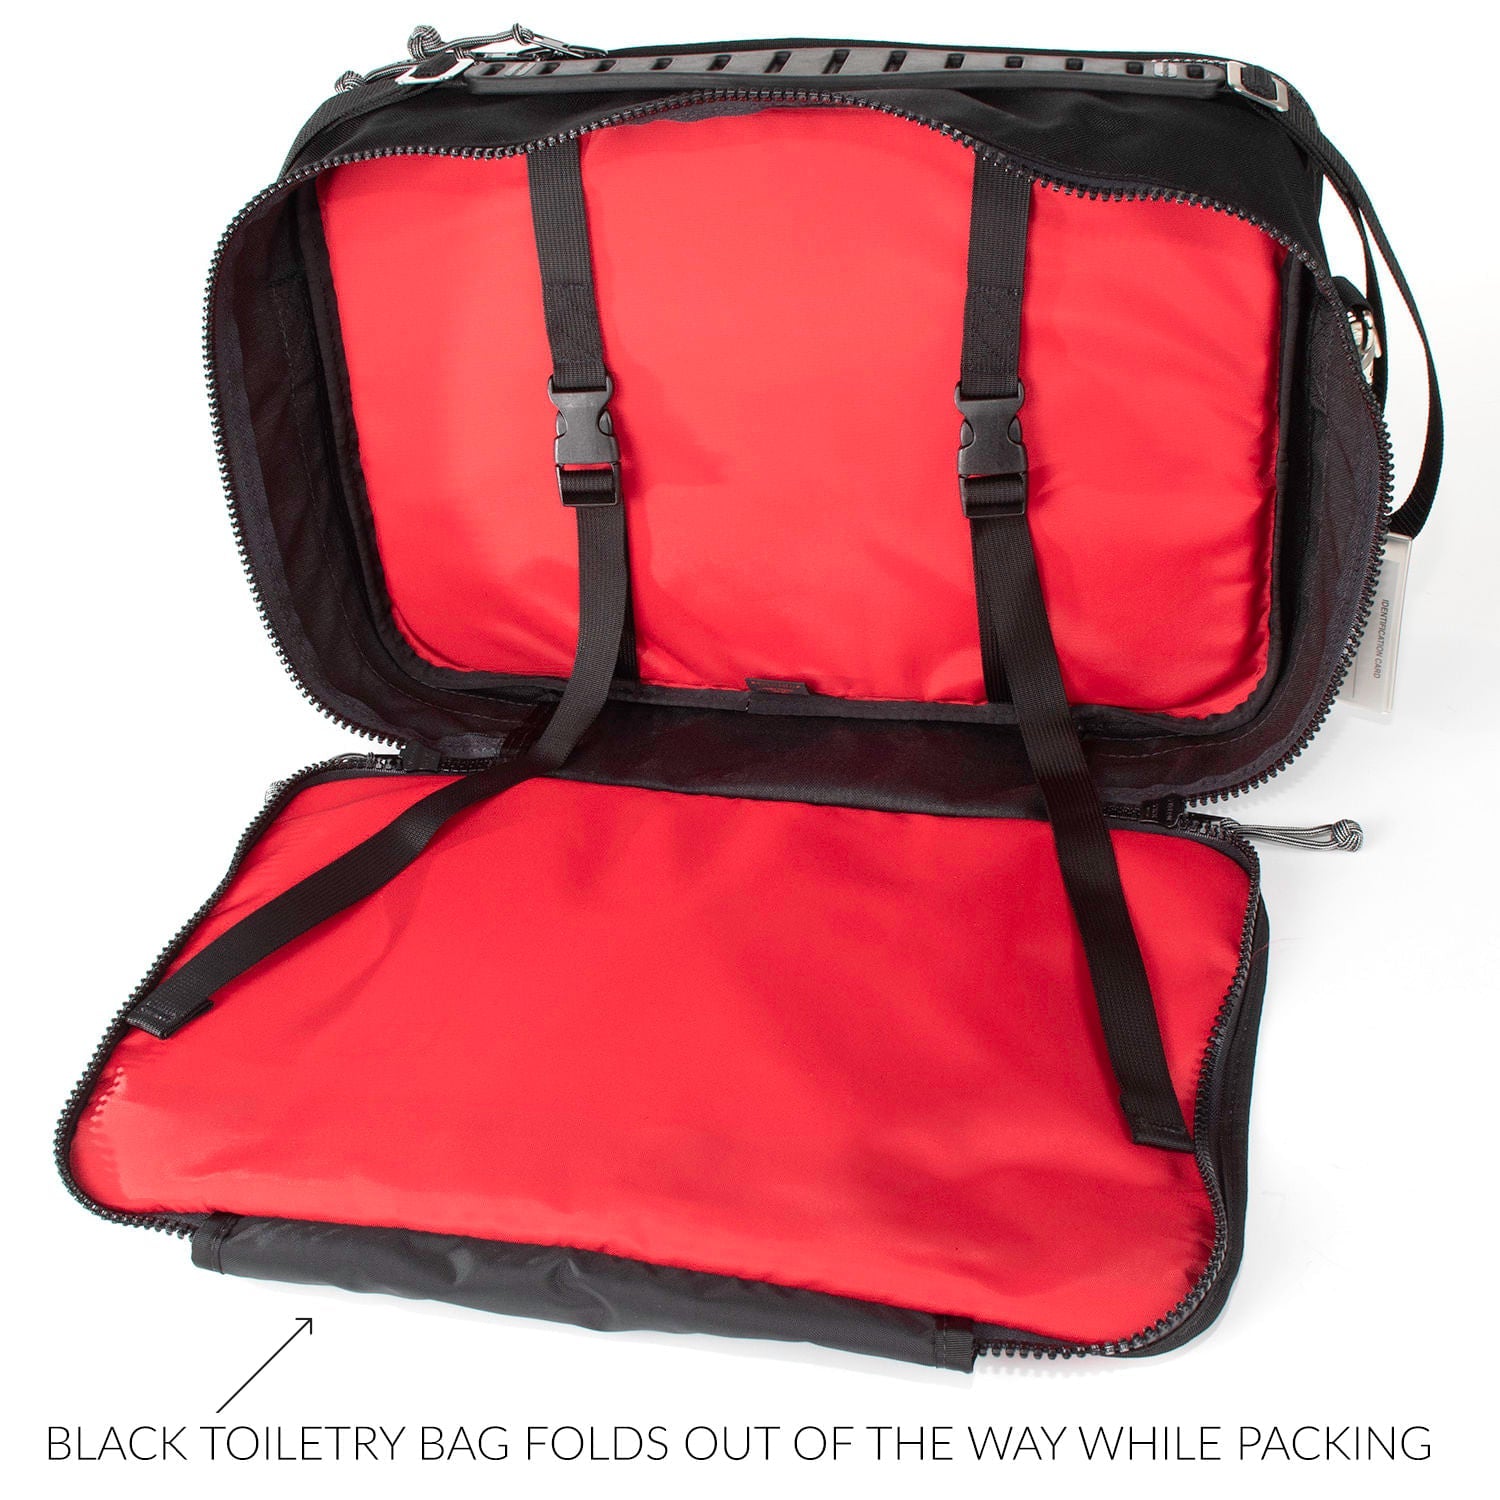 Black toiletry bag folds out of the way while packing. 